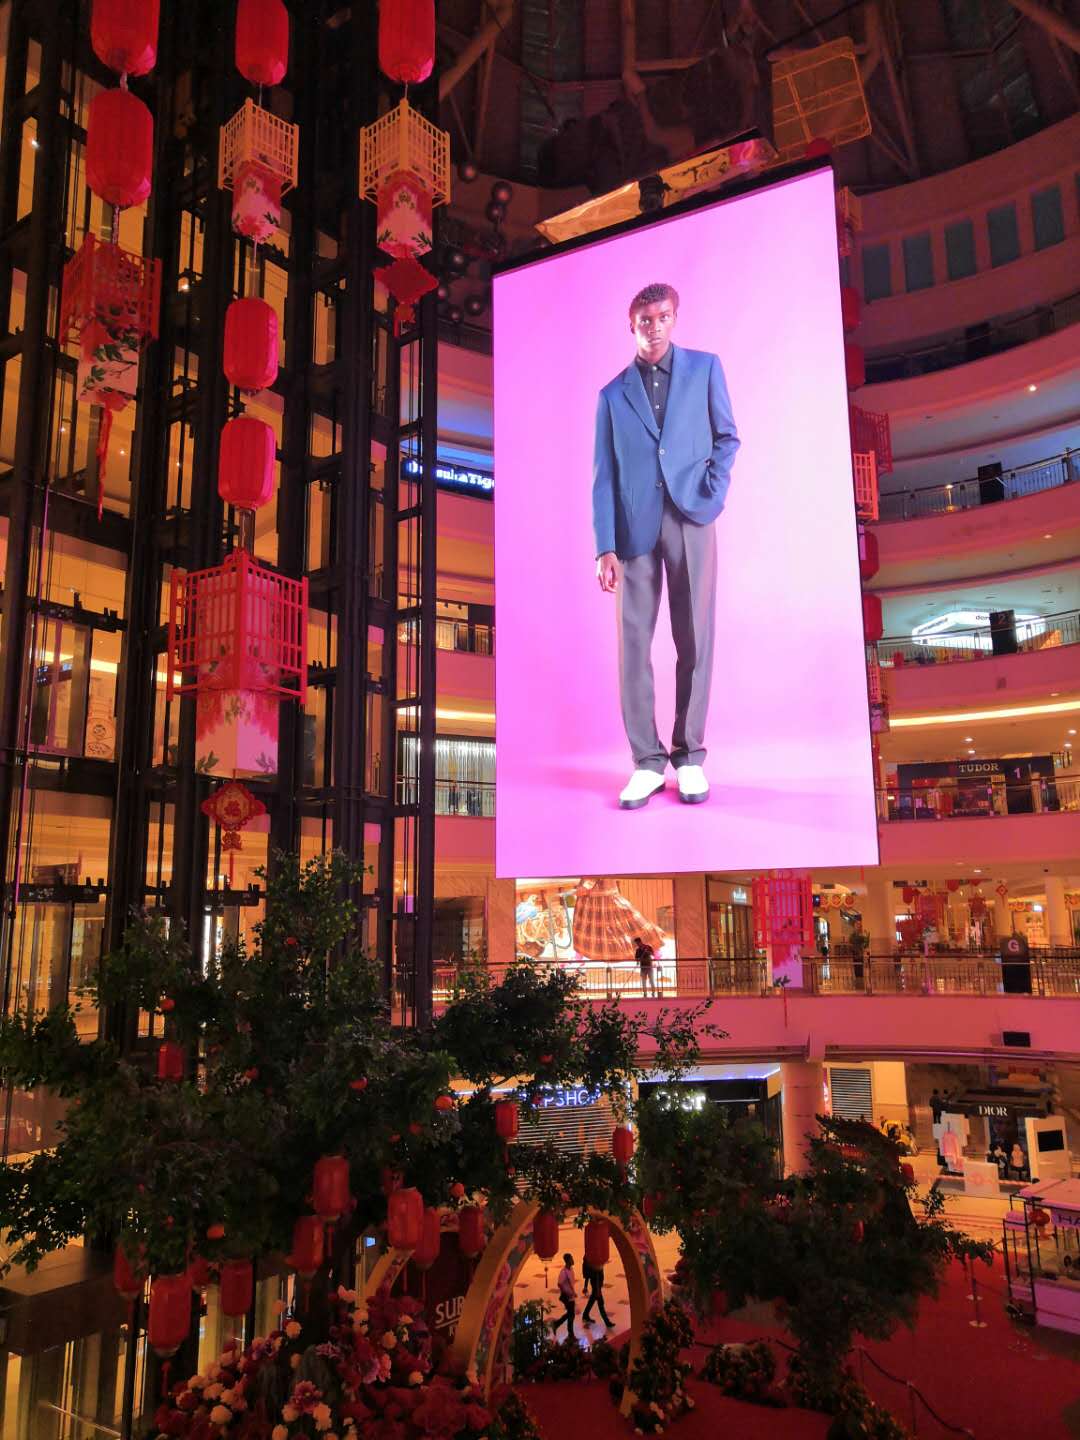 suria-klcc-mall-kl-malaysia-the-world-largest-led-hanging-rotating-double-sided-screen-display-ledsign-engineering_orig